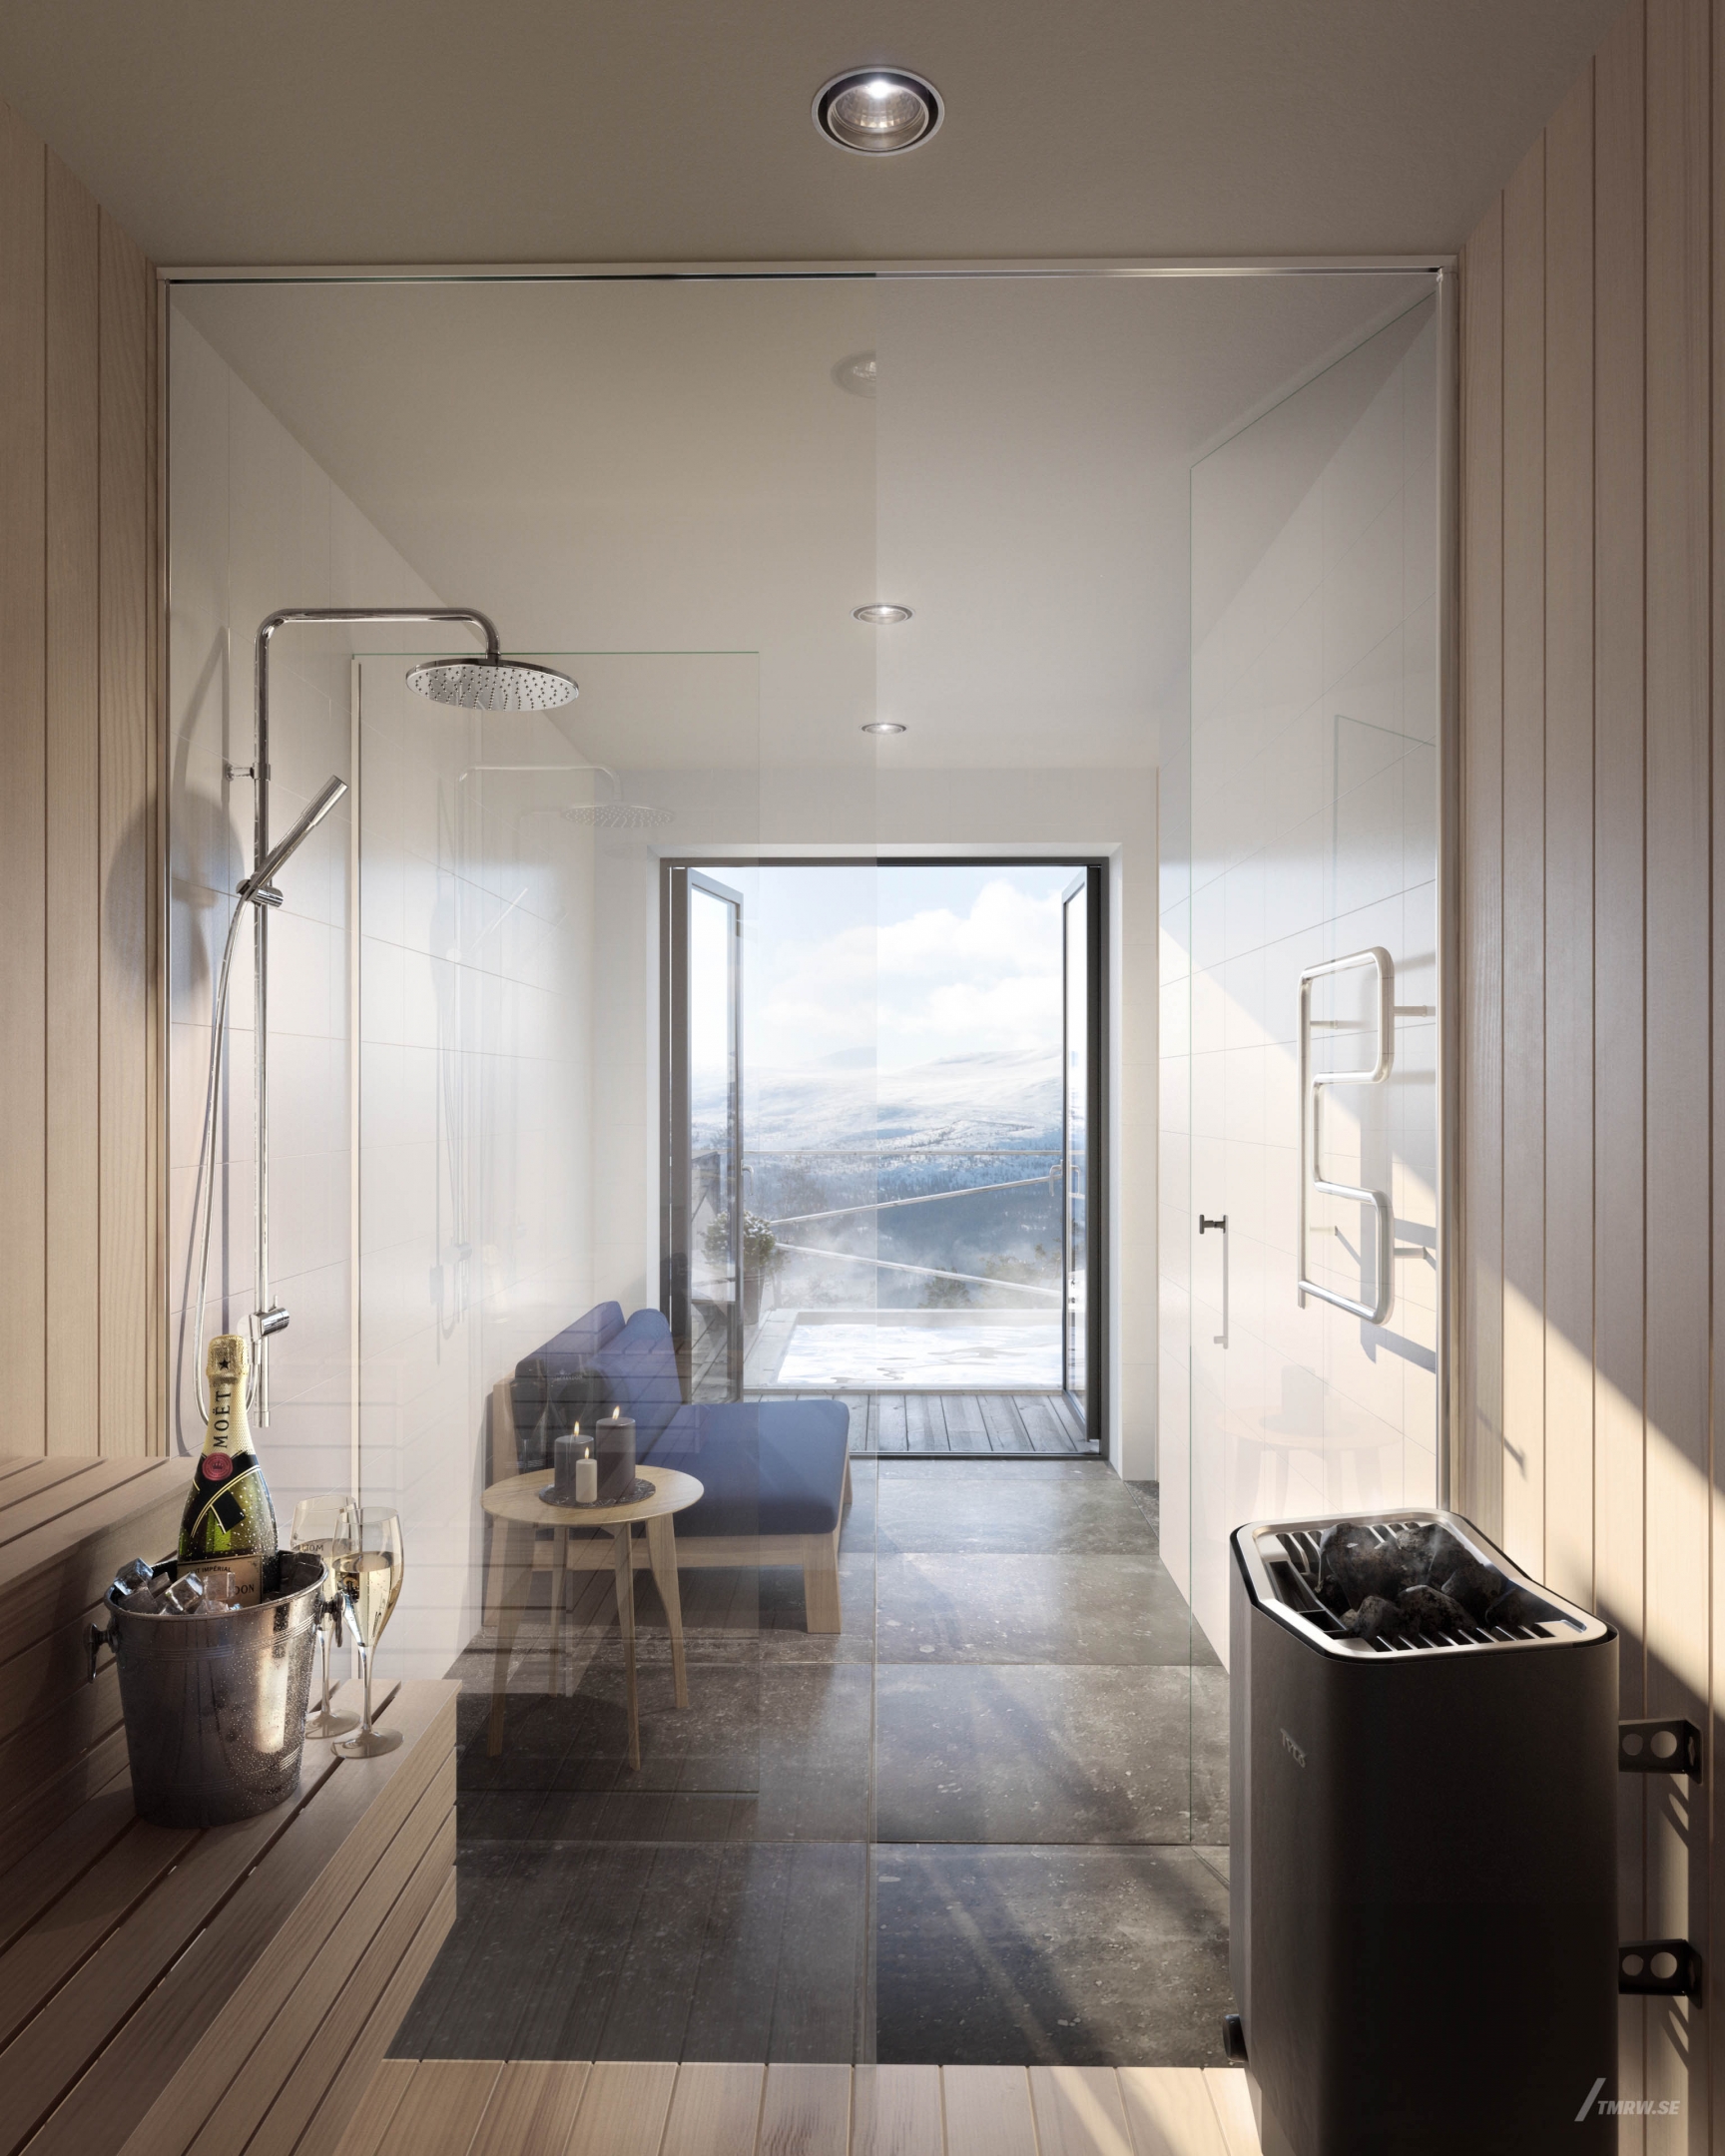 Architectural visualization of Lofsdalen for Bleck, sauna with big window, winter view